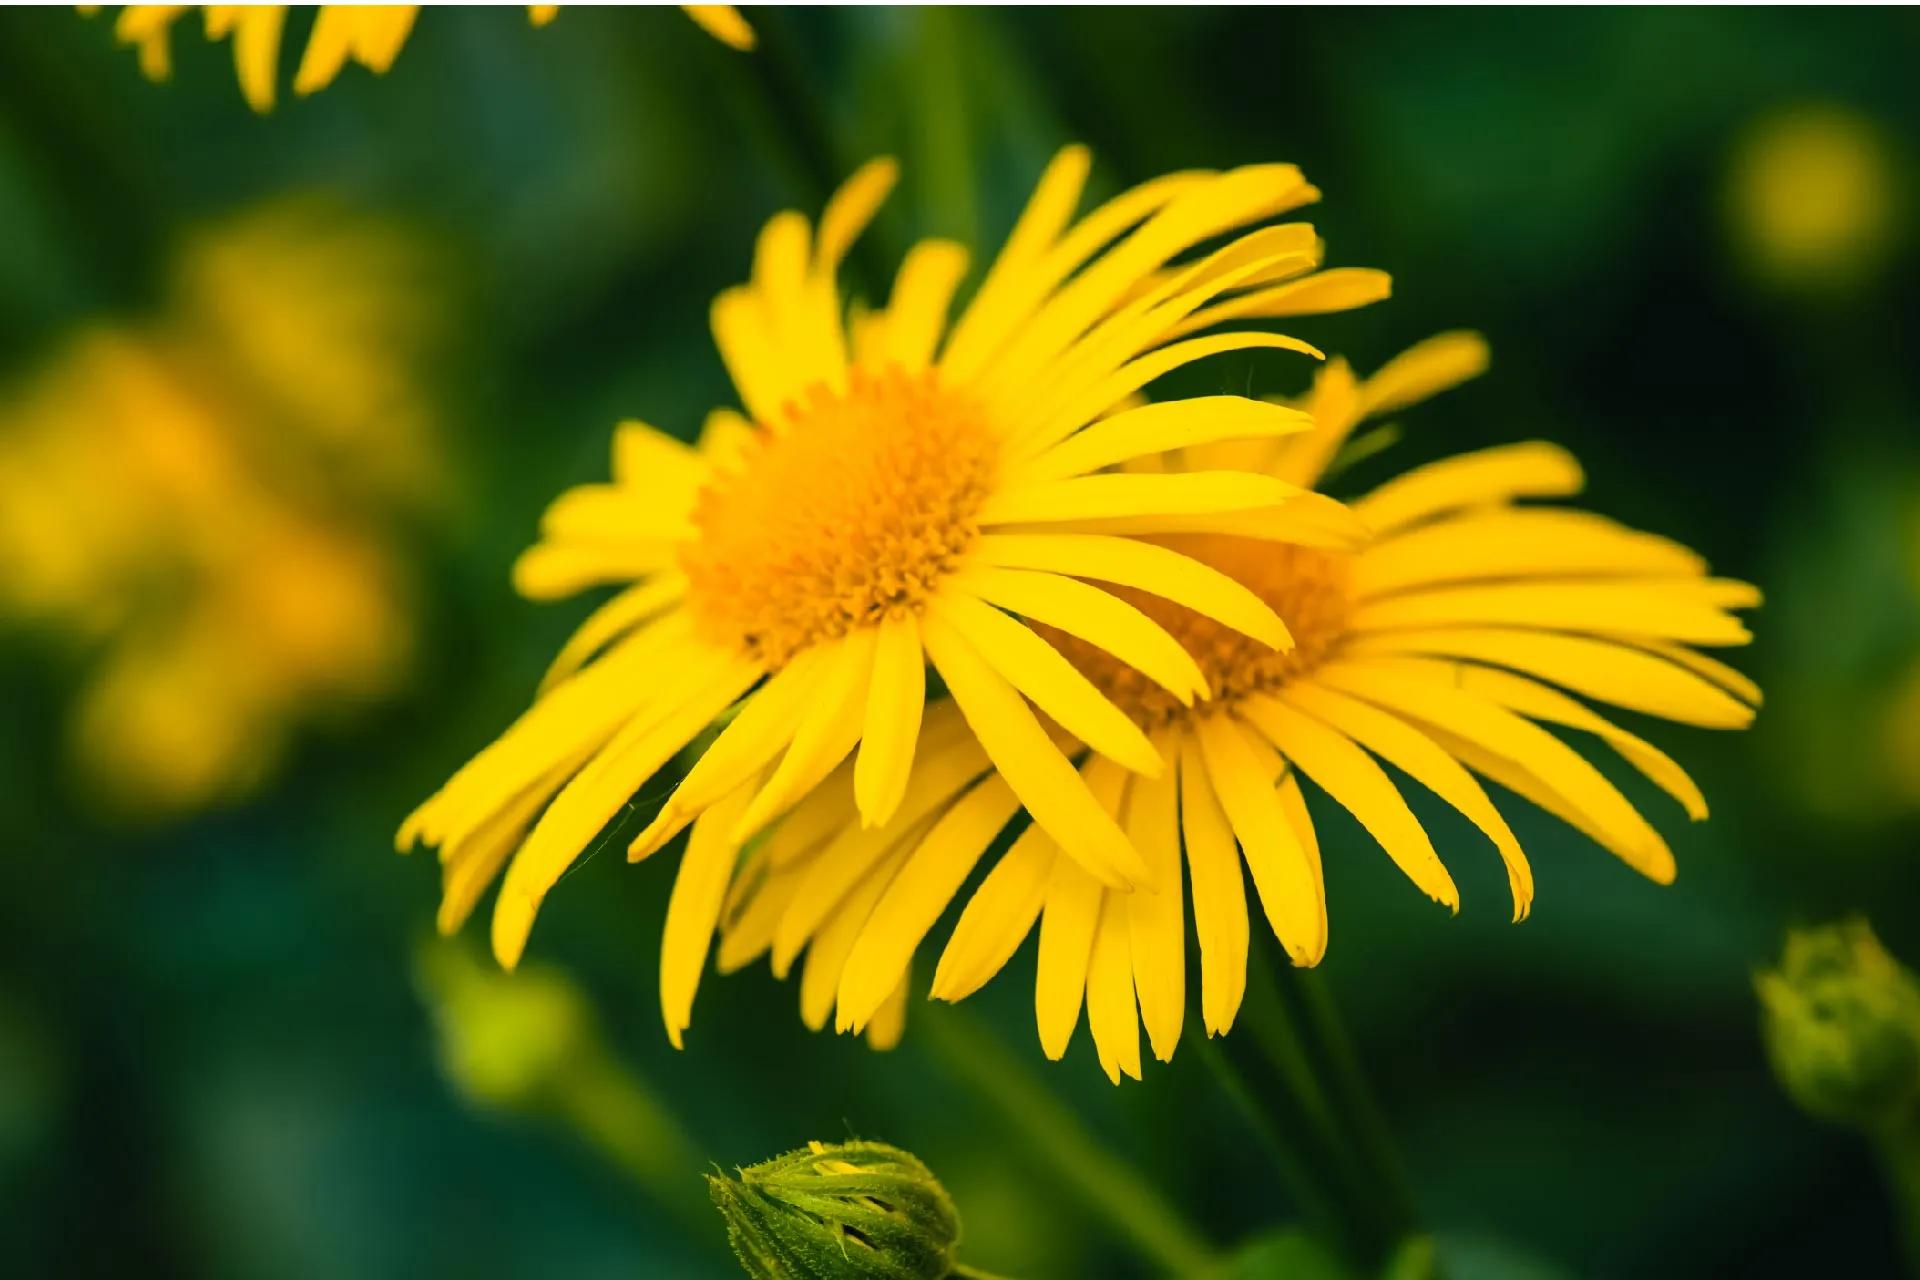 Arnica: Overview, Benefits, Uses, and Side Effects